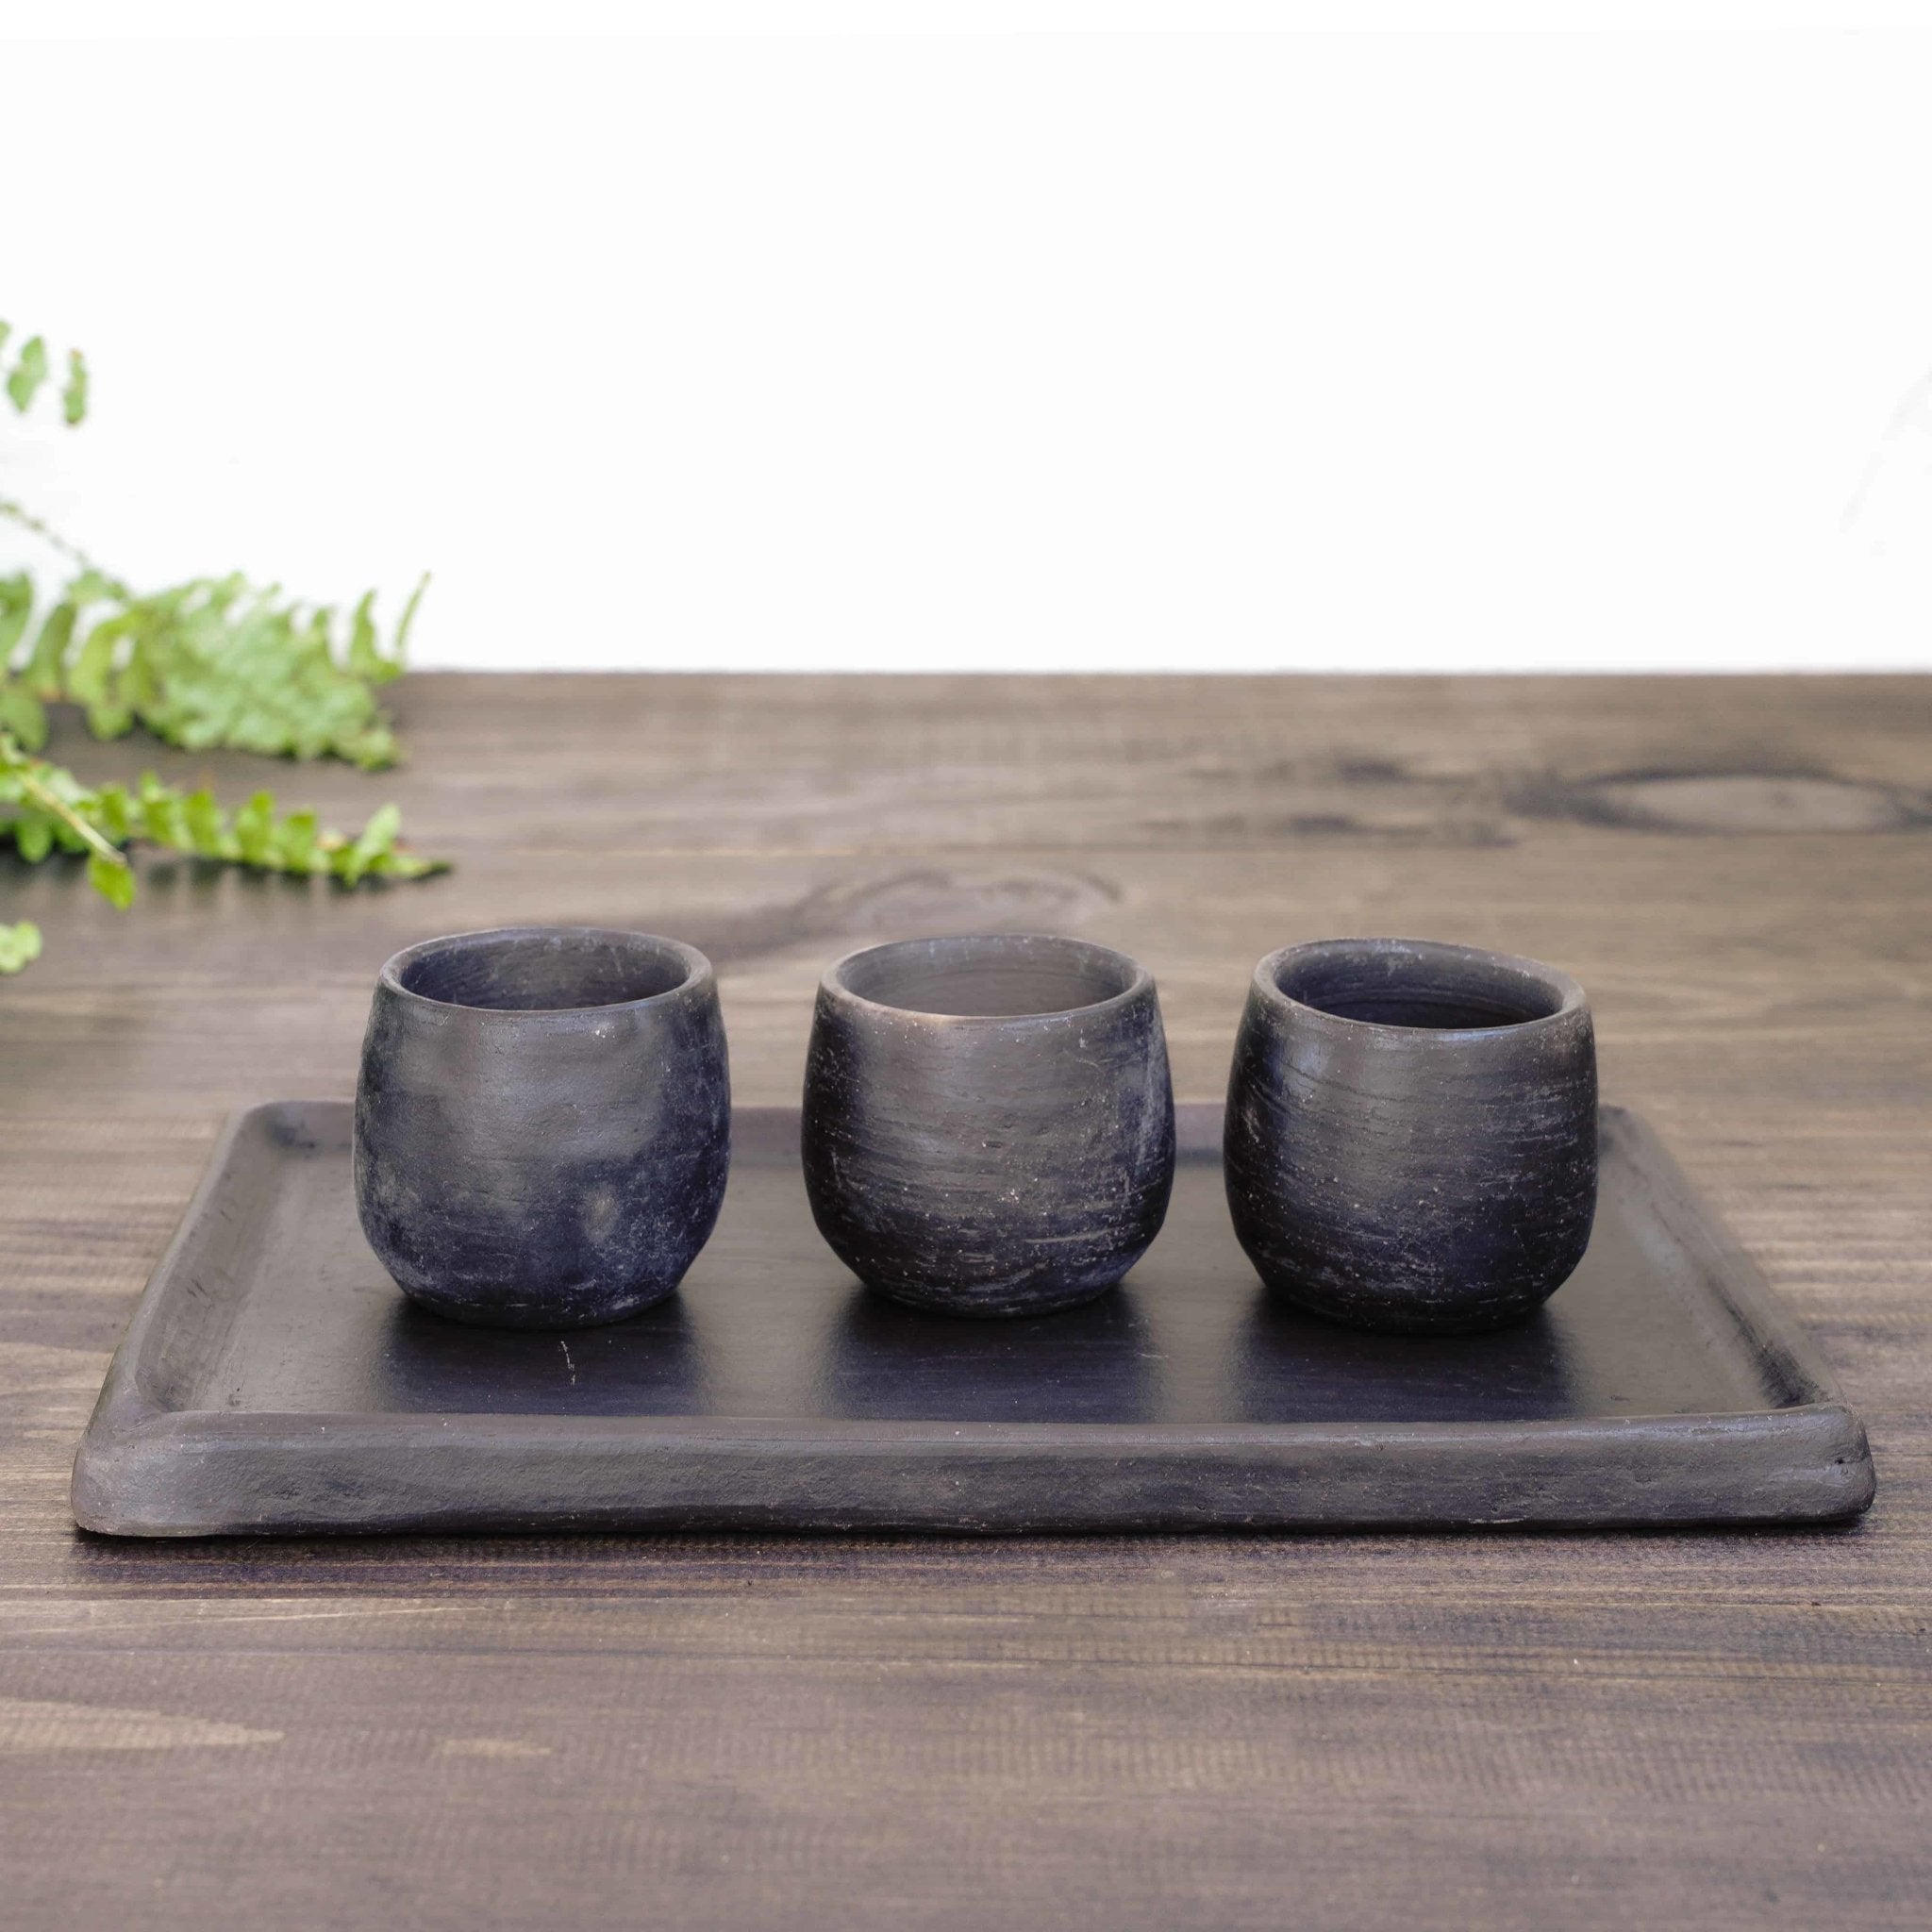 The Blackout Rectangular Platter by Ana María Hernández - Wool+Clay